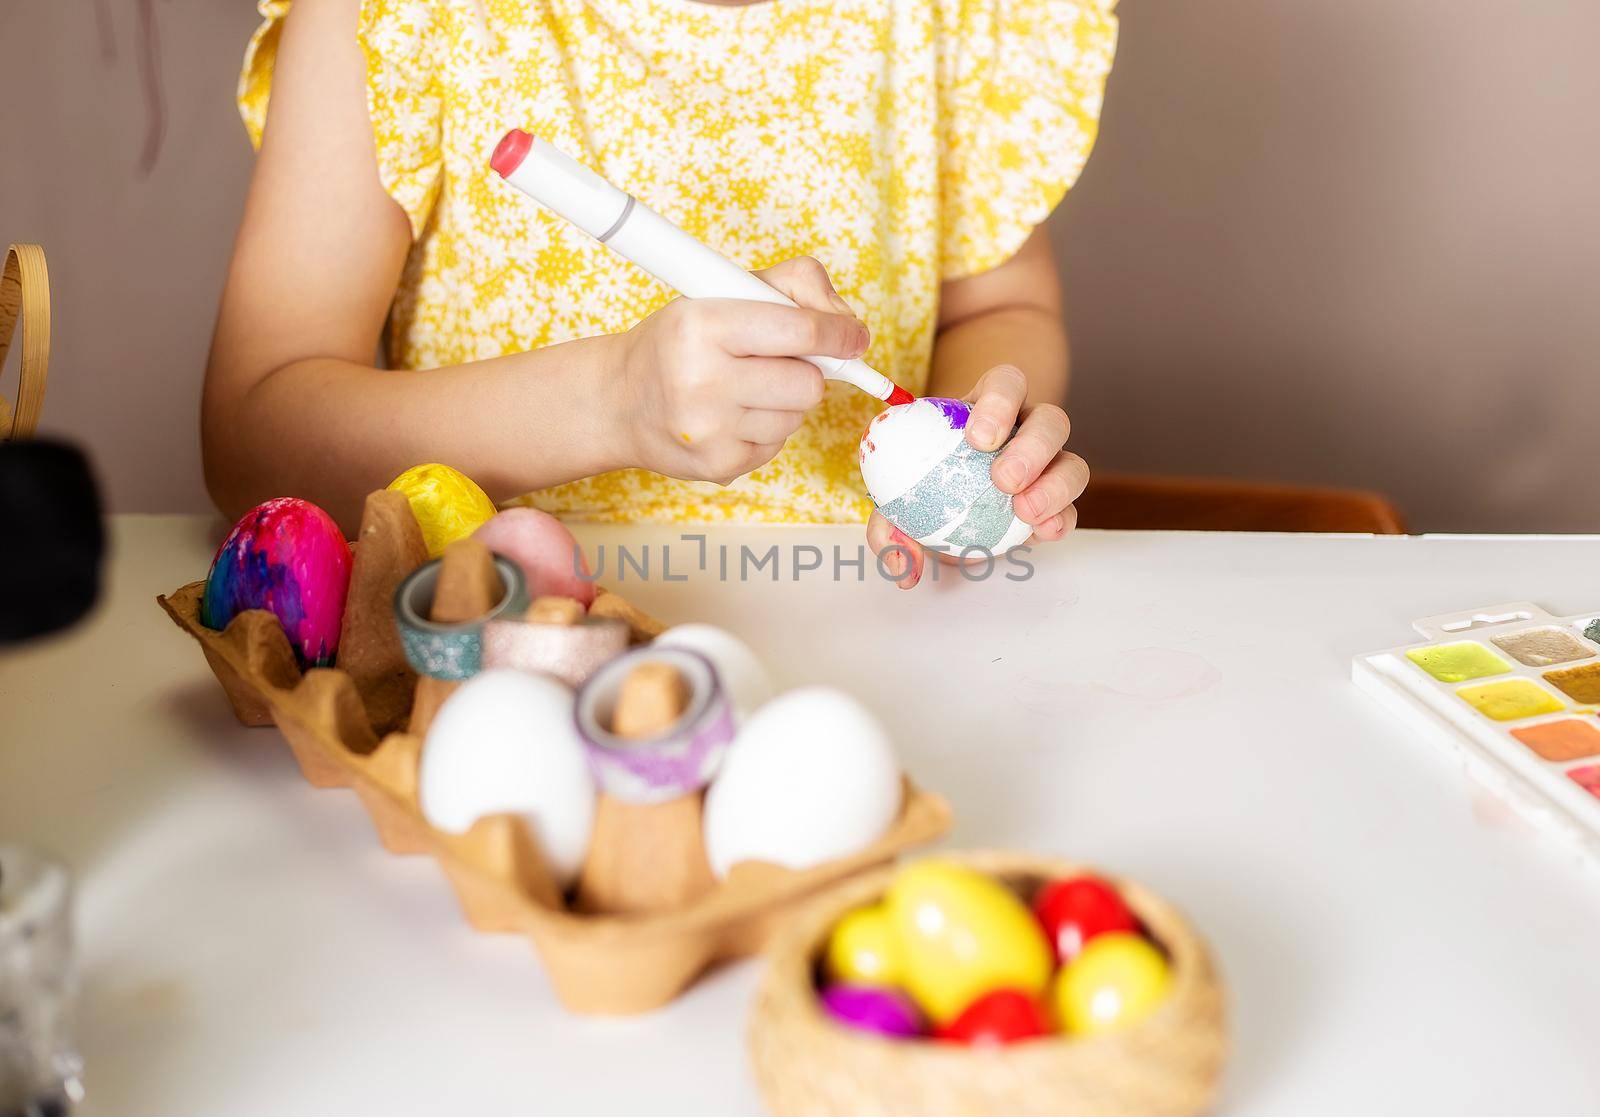 A close-up on the hands of a small Caucasian girl 5 years old paints eggs with special markers paints for the Christian spring holiday of Easter. Girl dressed in a yellow floral dress